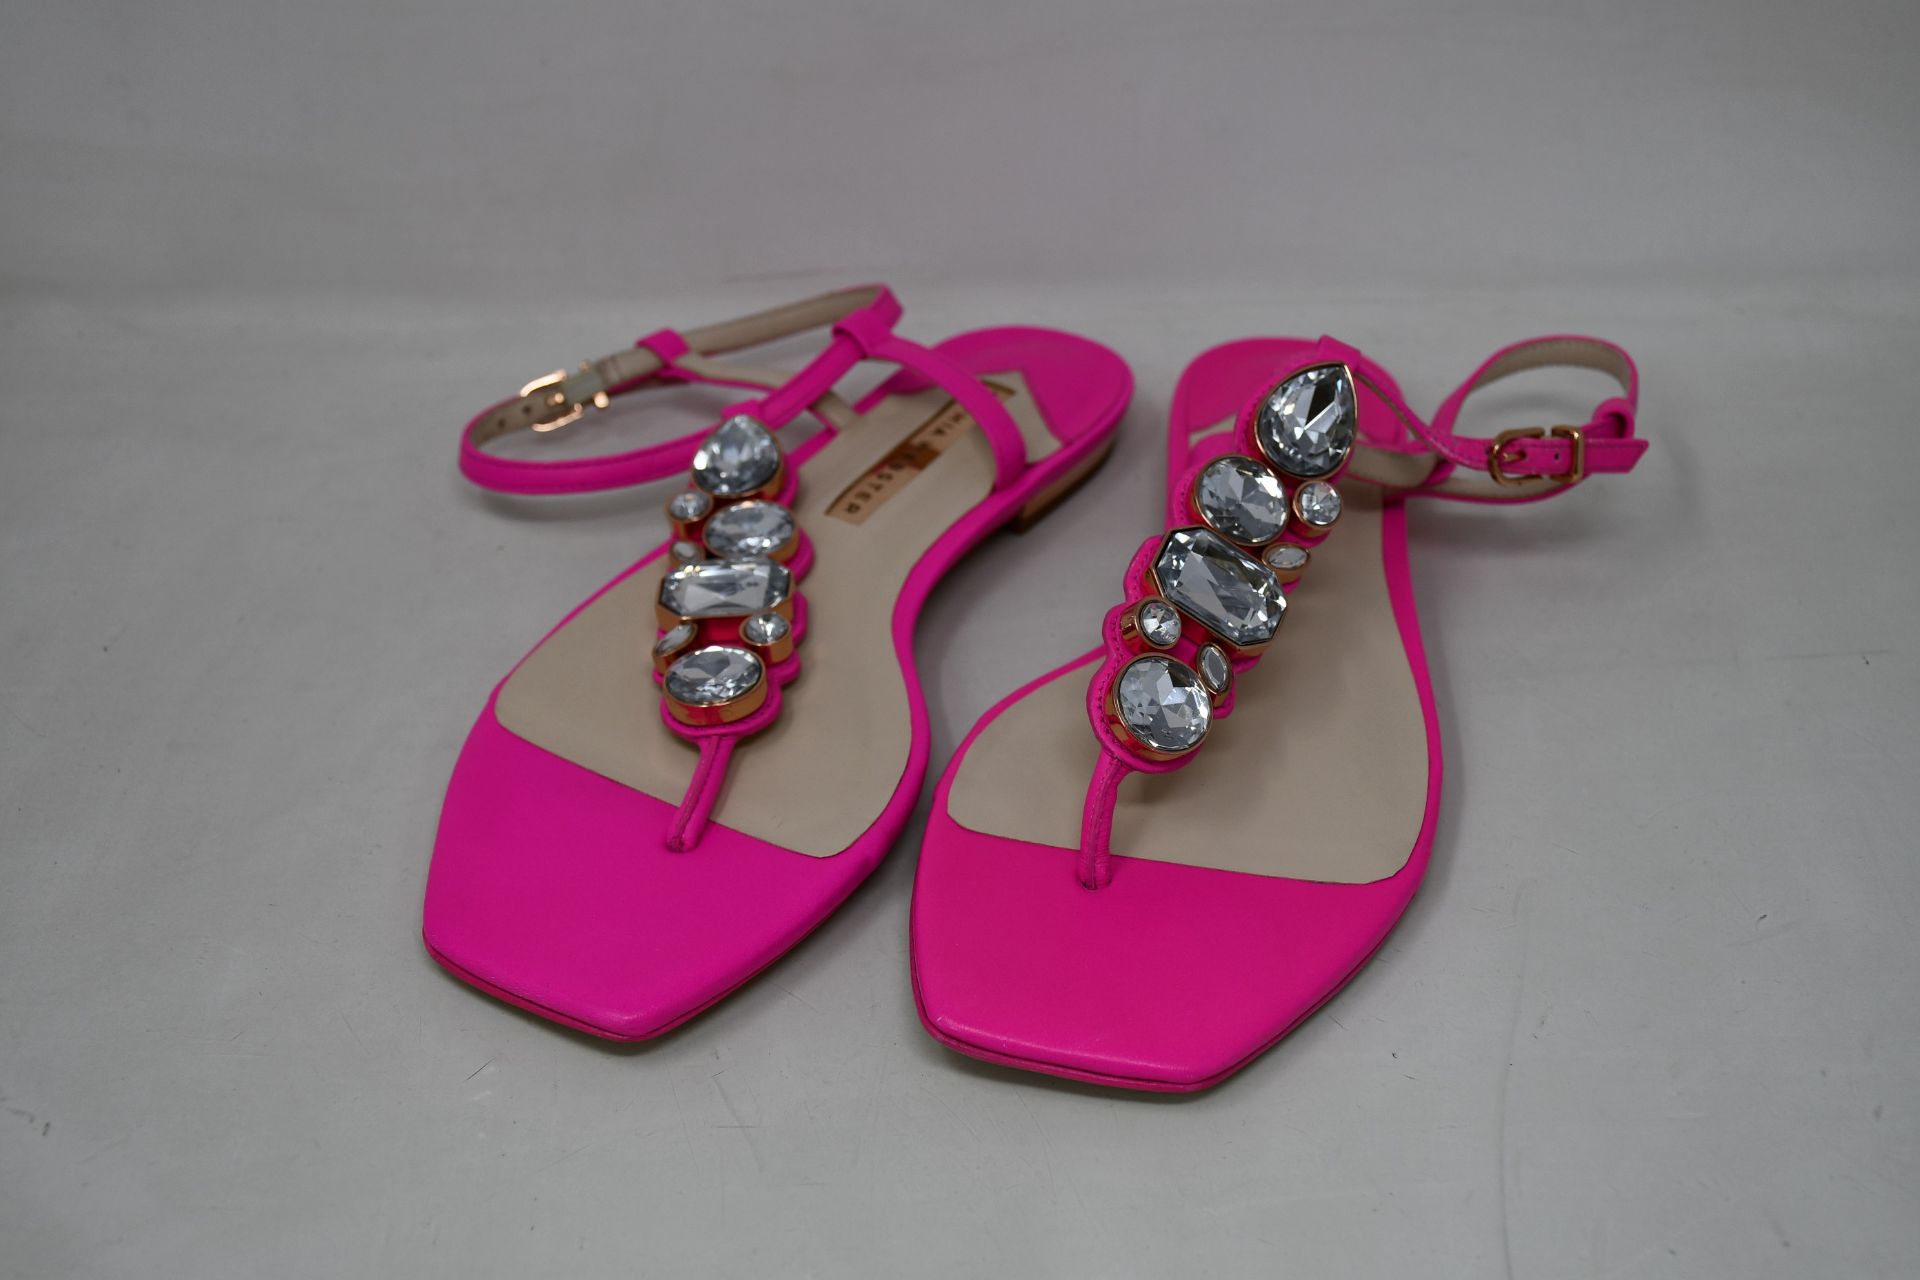 A pair of Sophie Webster pink gem studded shoes (EU 37, Possibly ex-display - No box).